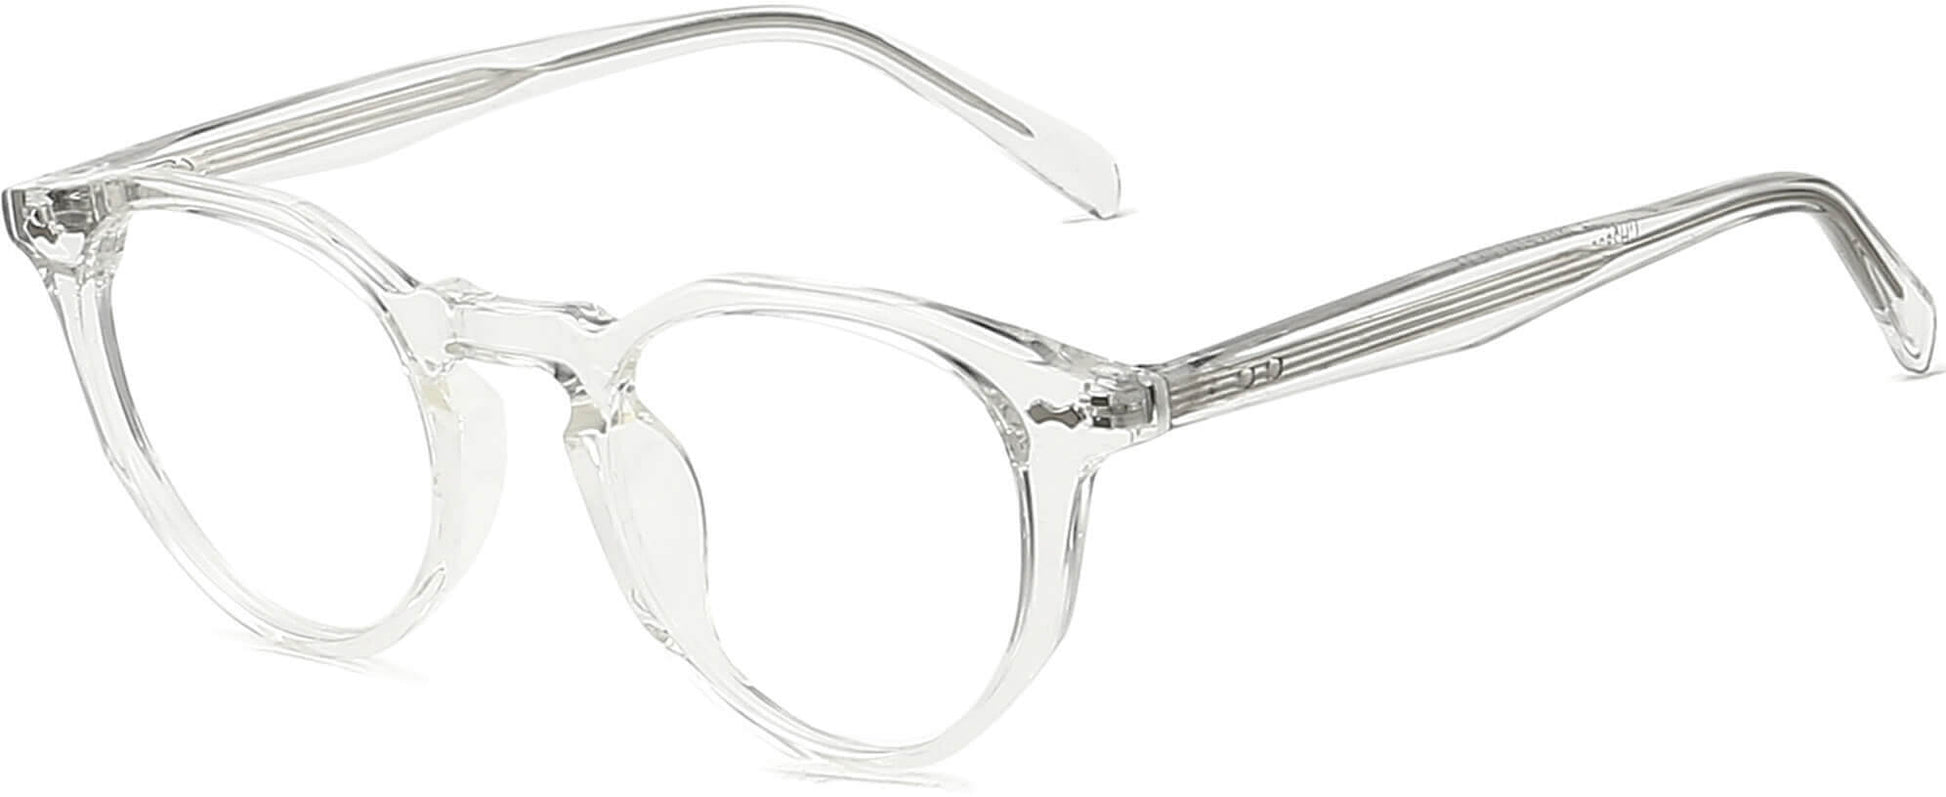 Urban Round Clear Eyeglasses from ANRRI, angle view